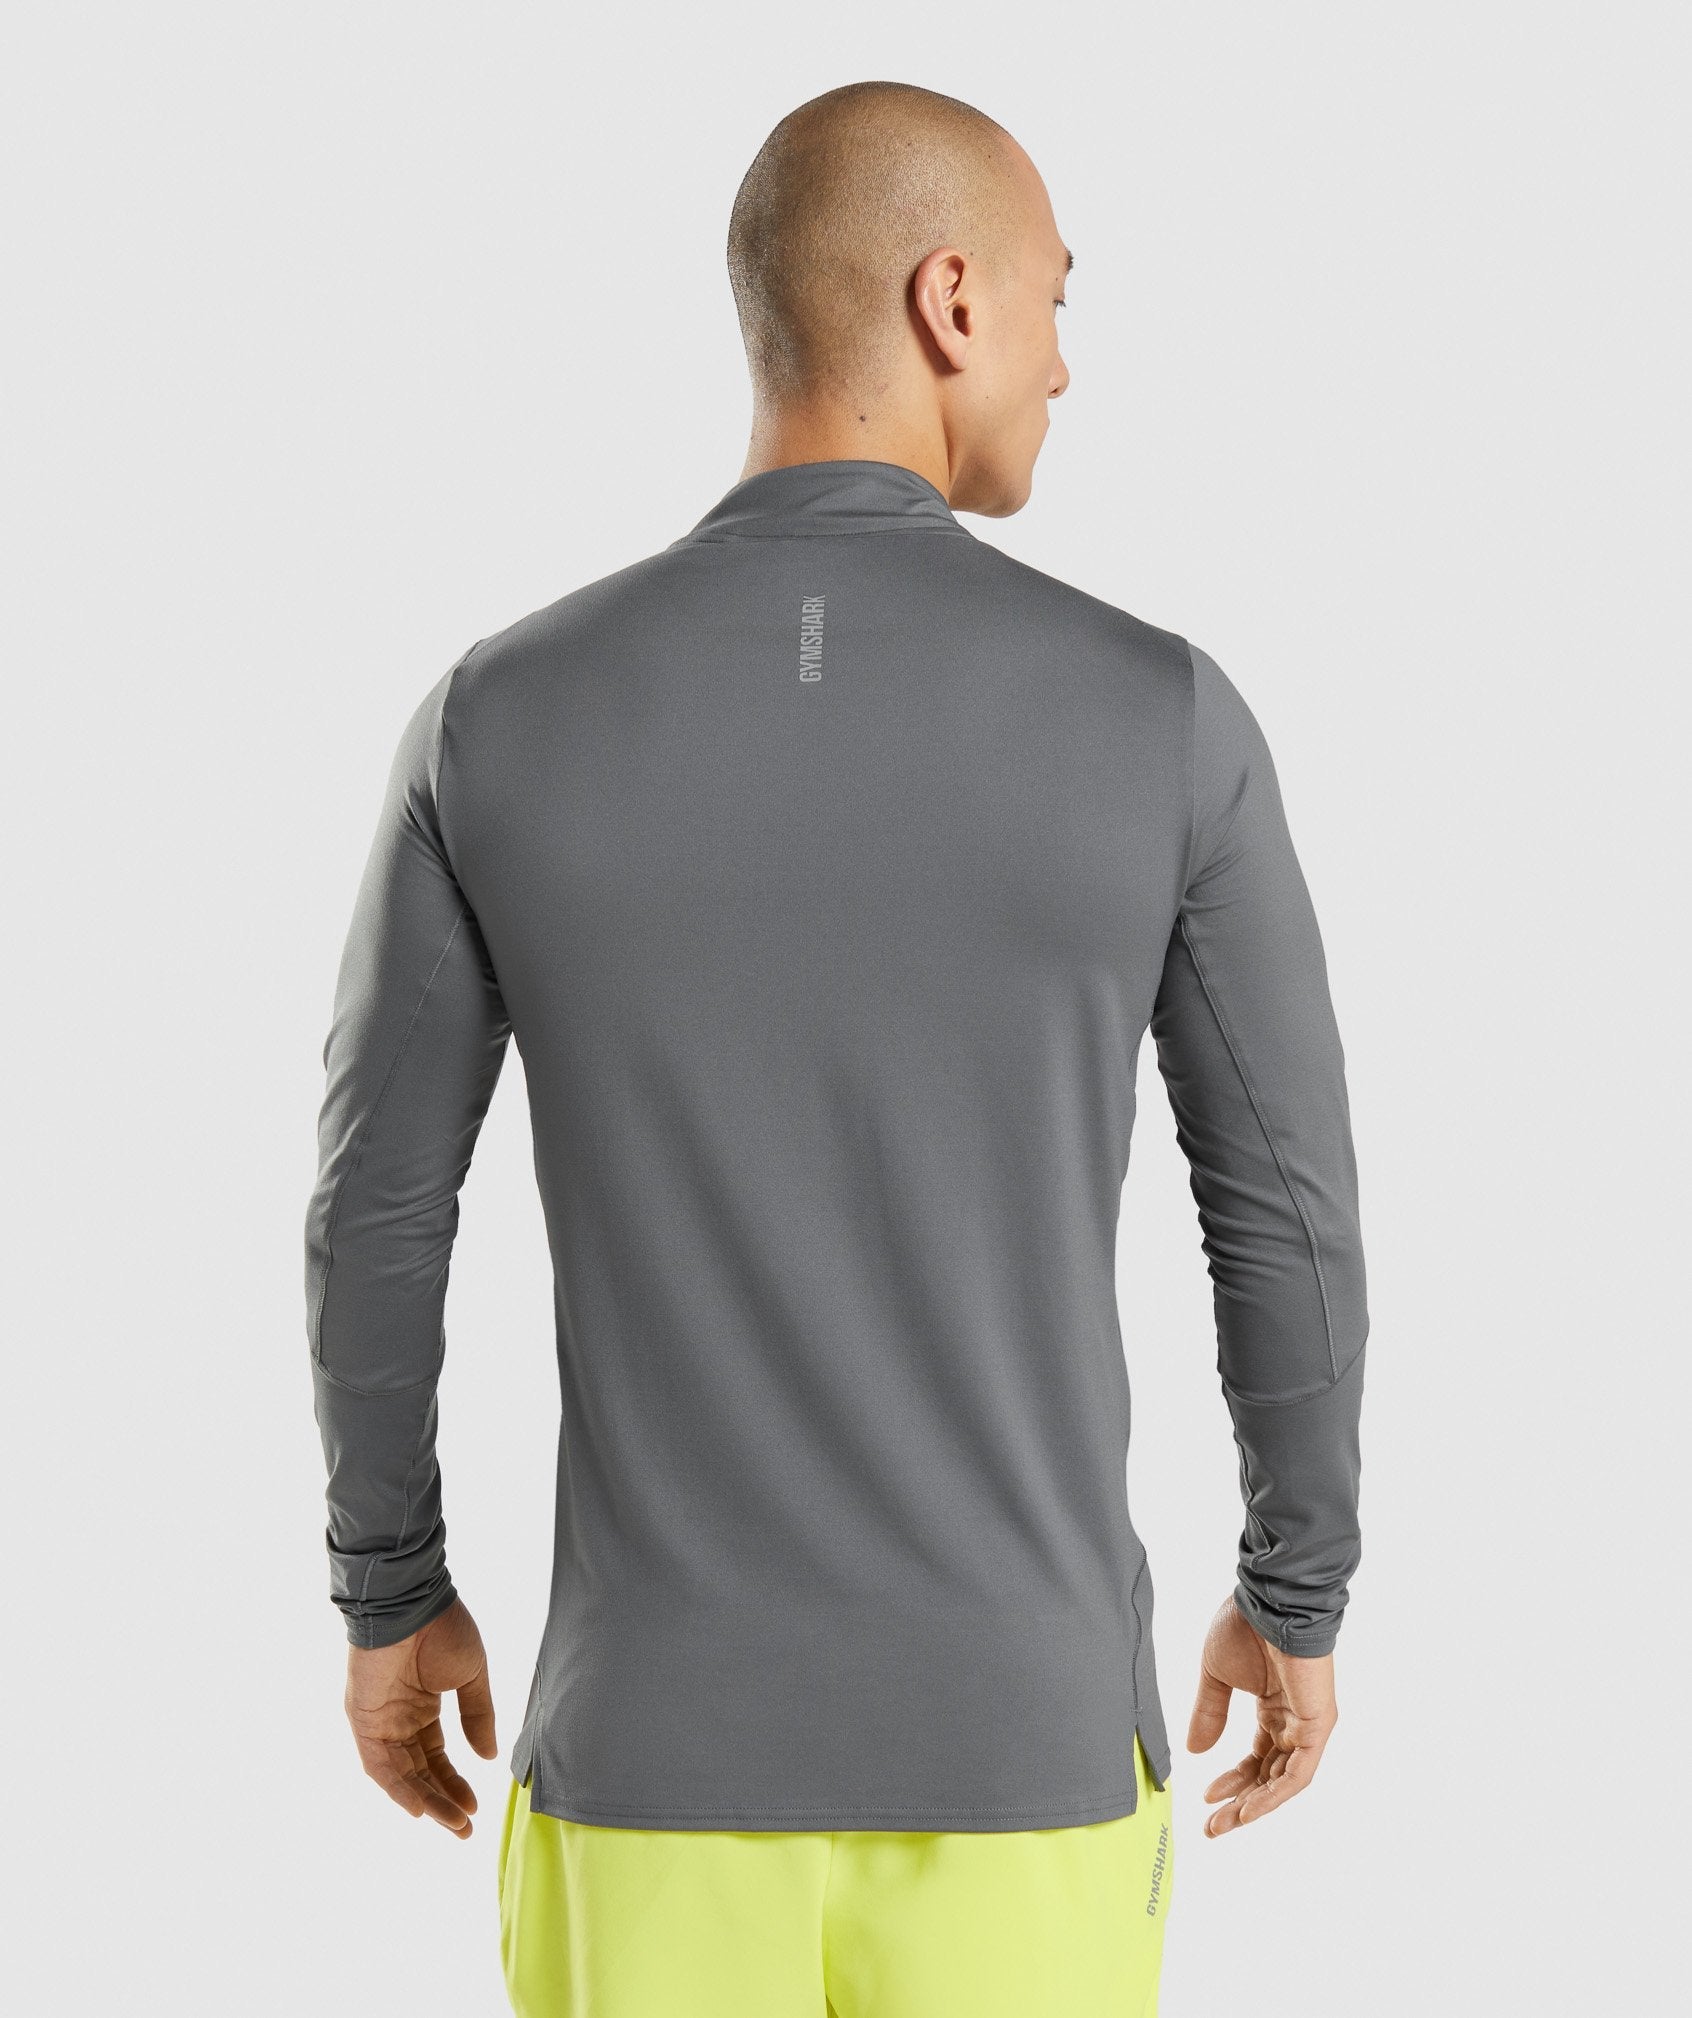 Speed 1/4 Zip Pullover in Charcoal - view 2